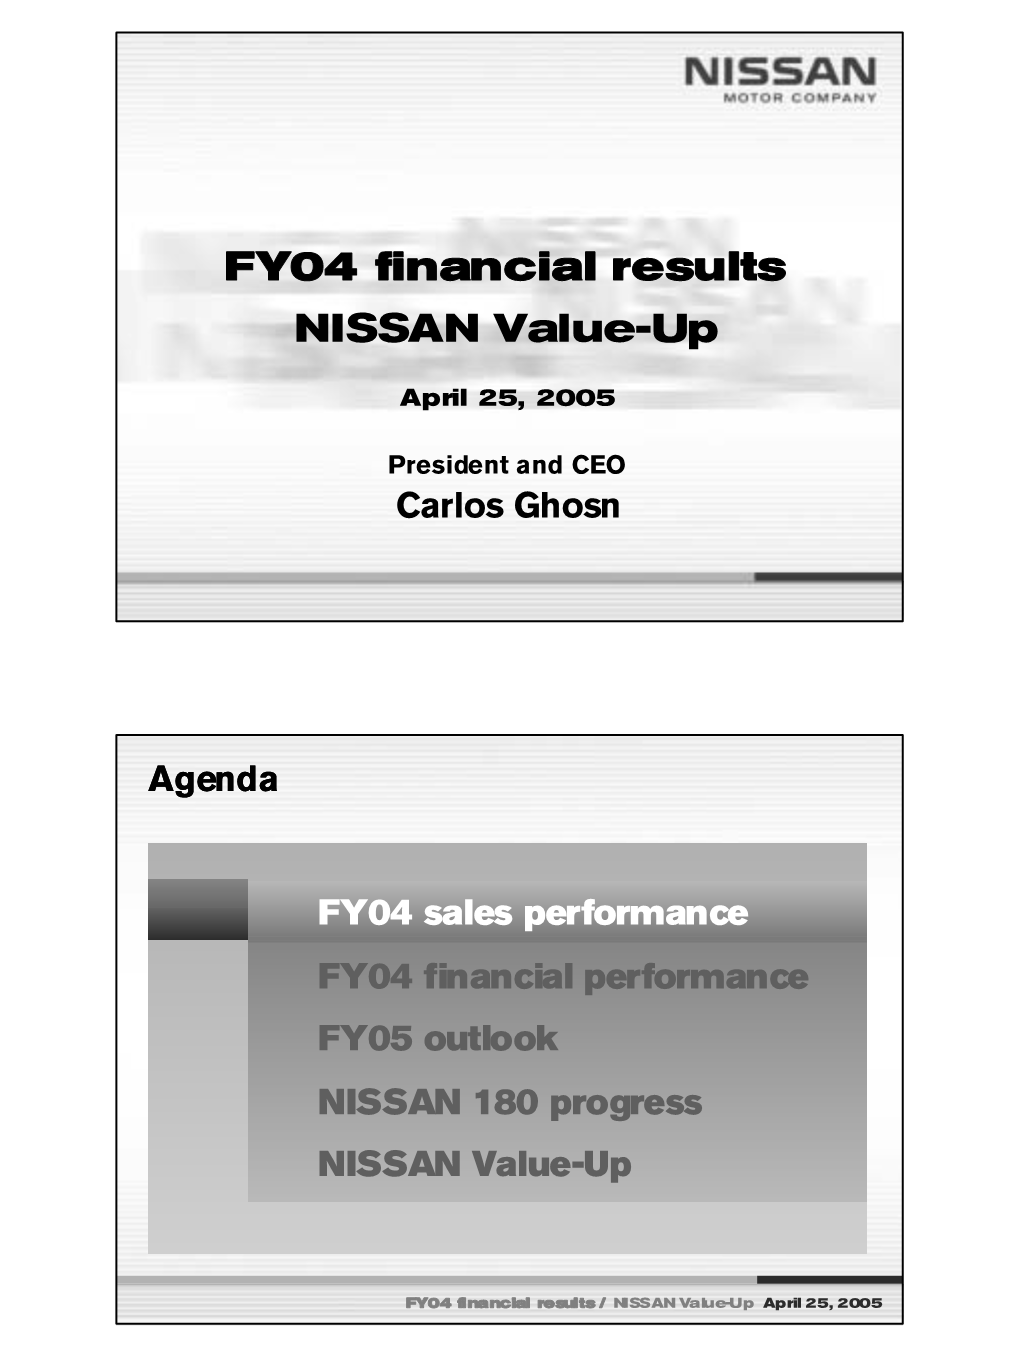 FY04 Financial Results NISSAN Value-Up